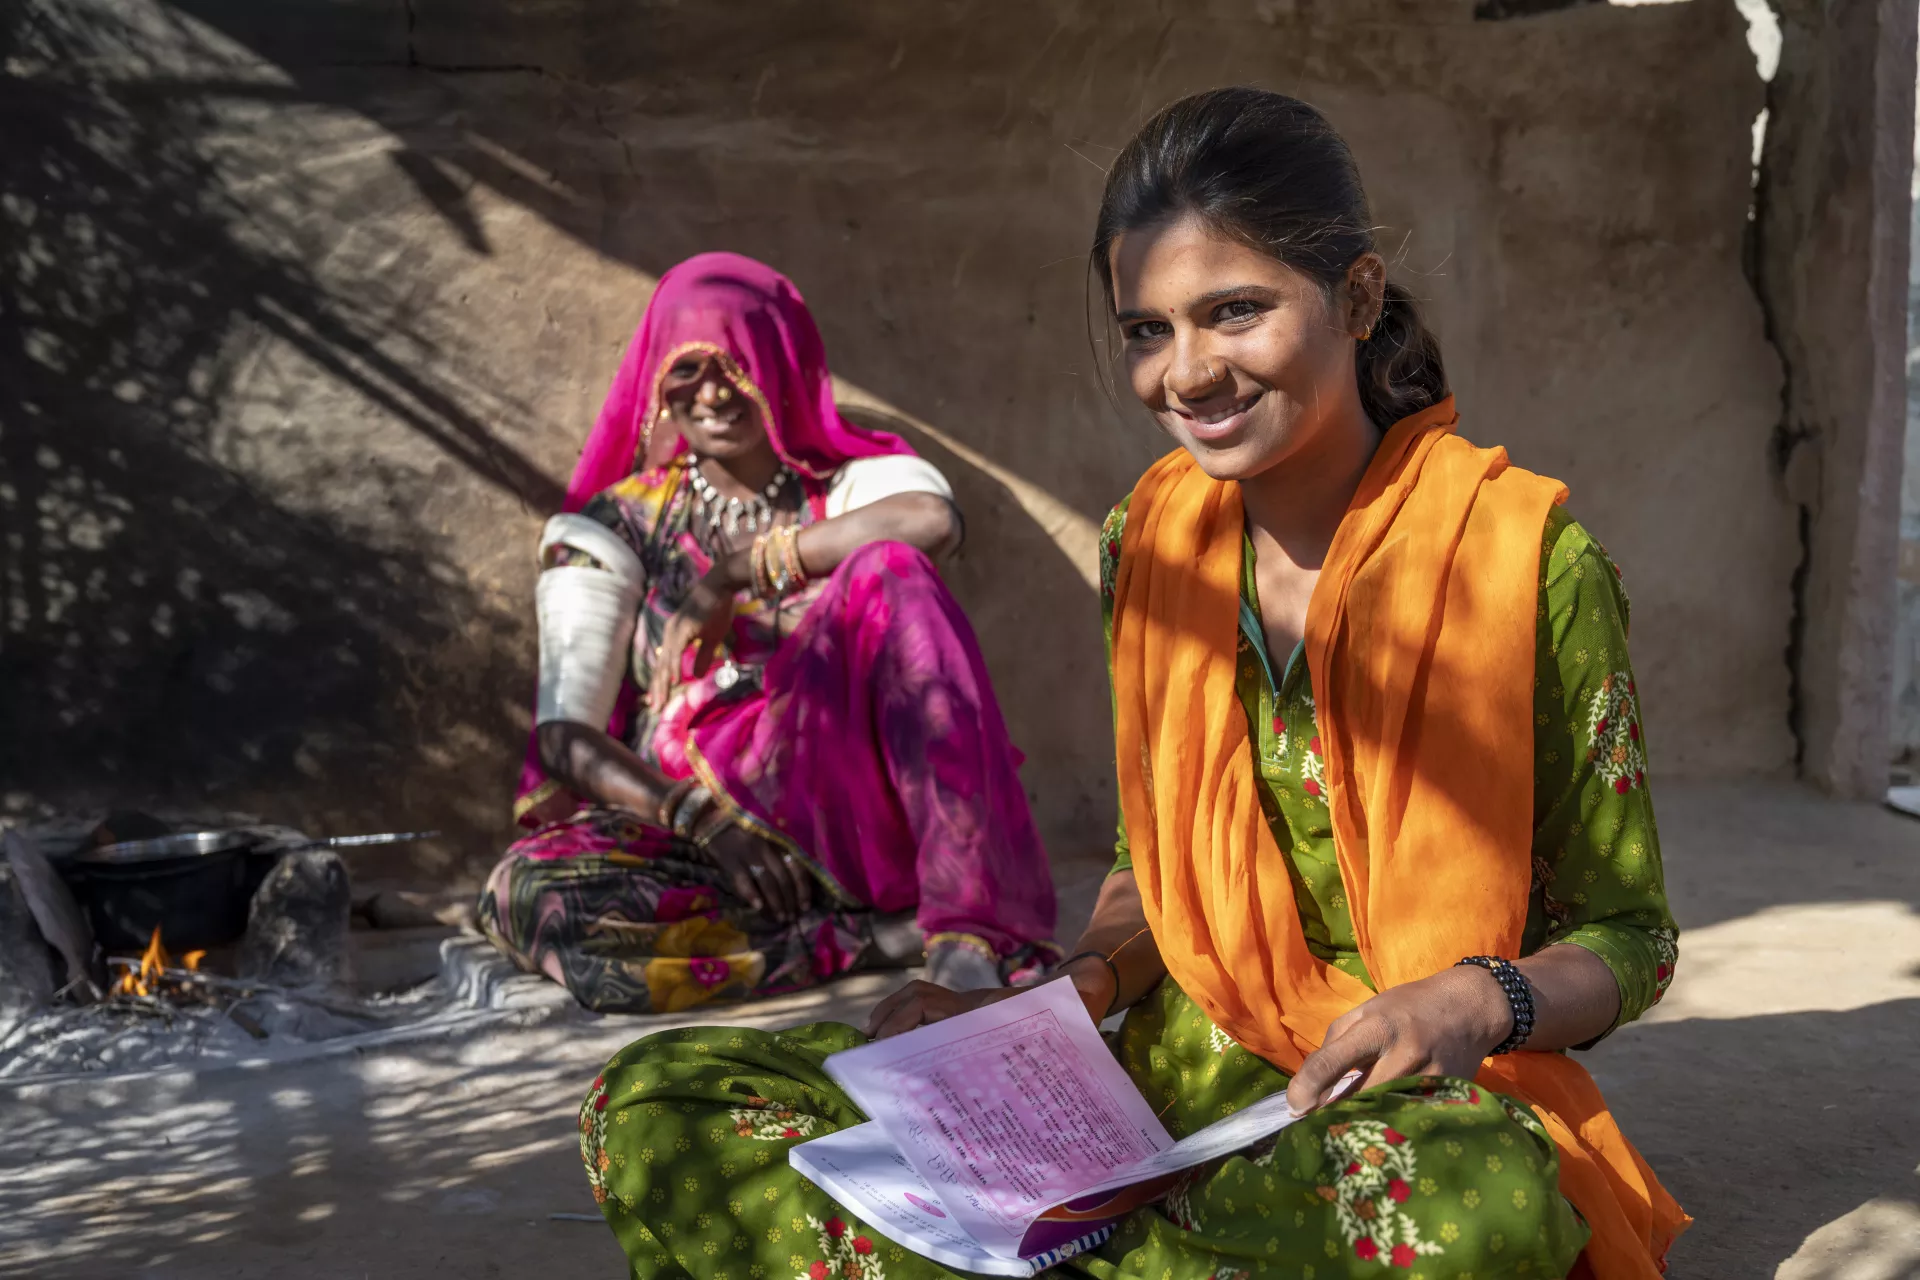 Vira (16) studies at home during covid 19 . she uses tradional books and mobile education. Location : Sanwlor Village, Barmer, Rajasthan, India